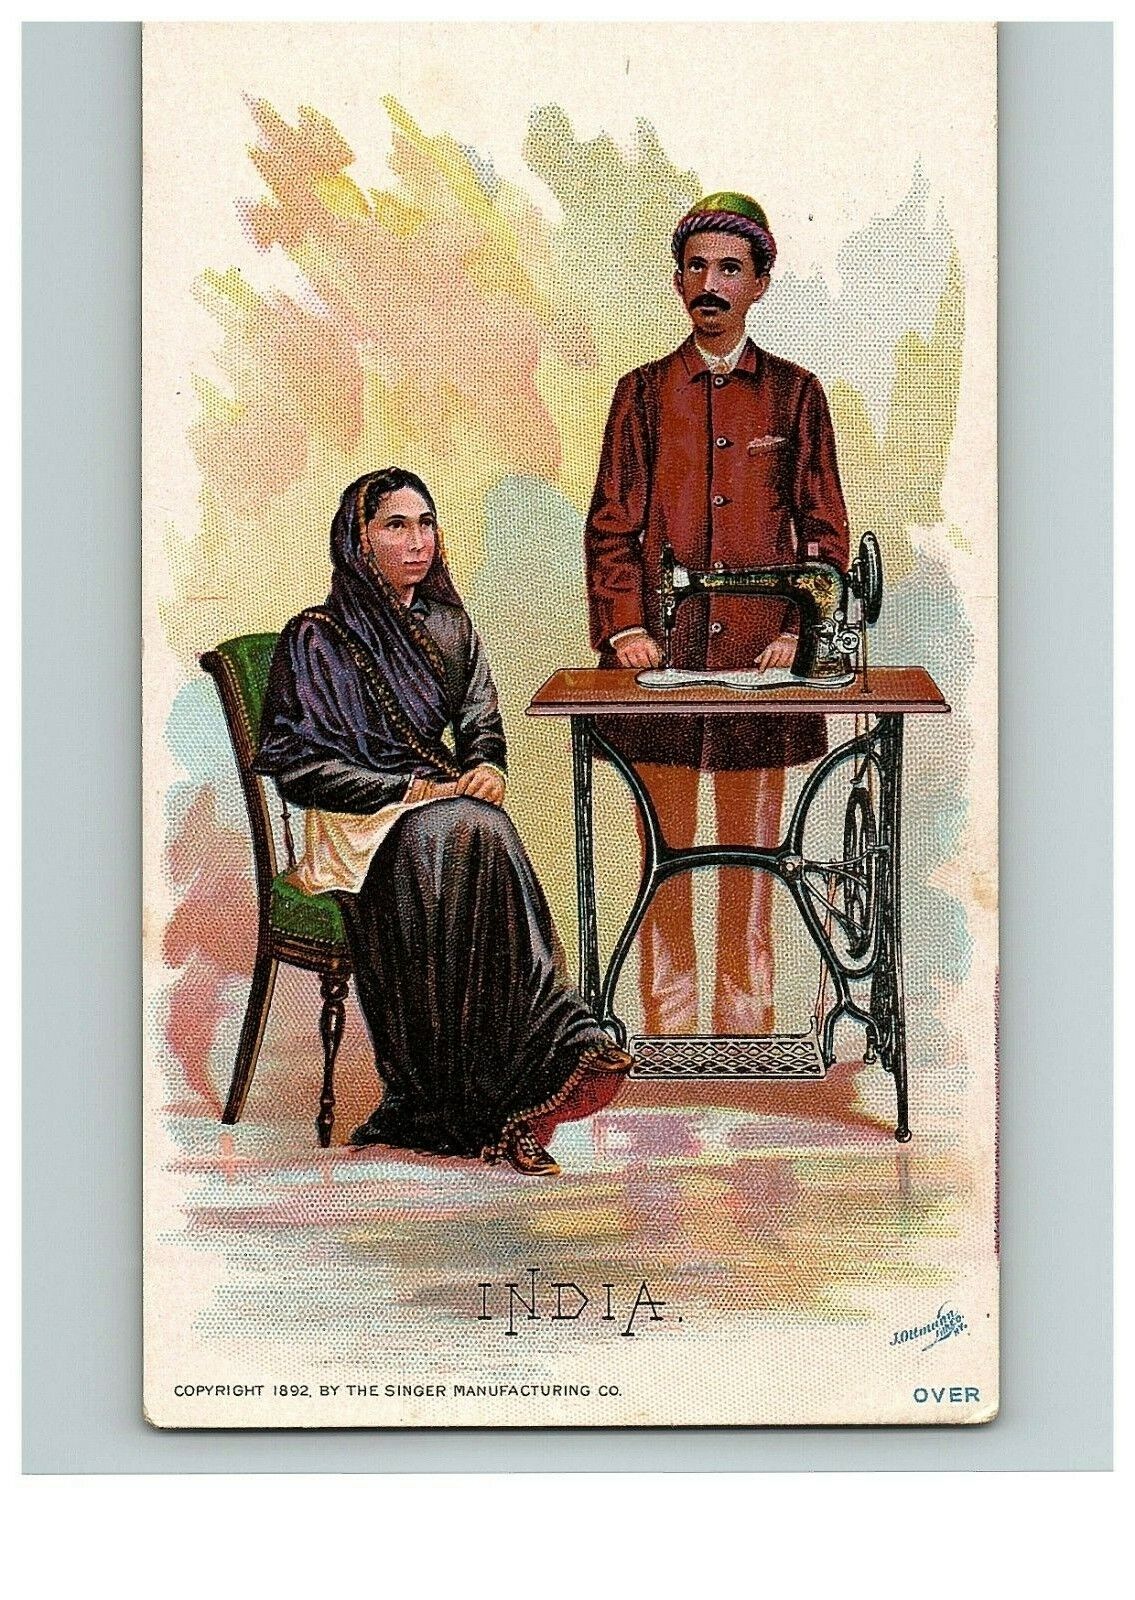 1892 Singer Manufacturing Co Trade India Sewing Card Victorian Europe South Asia